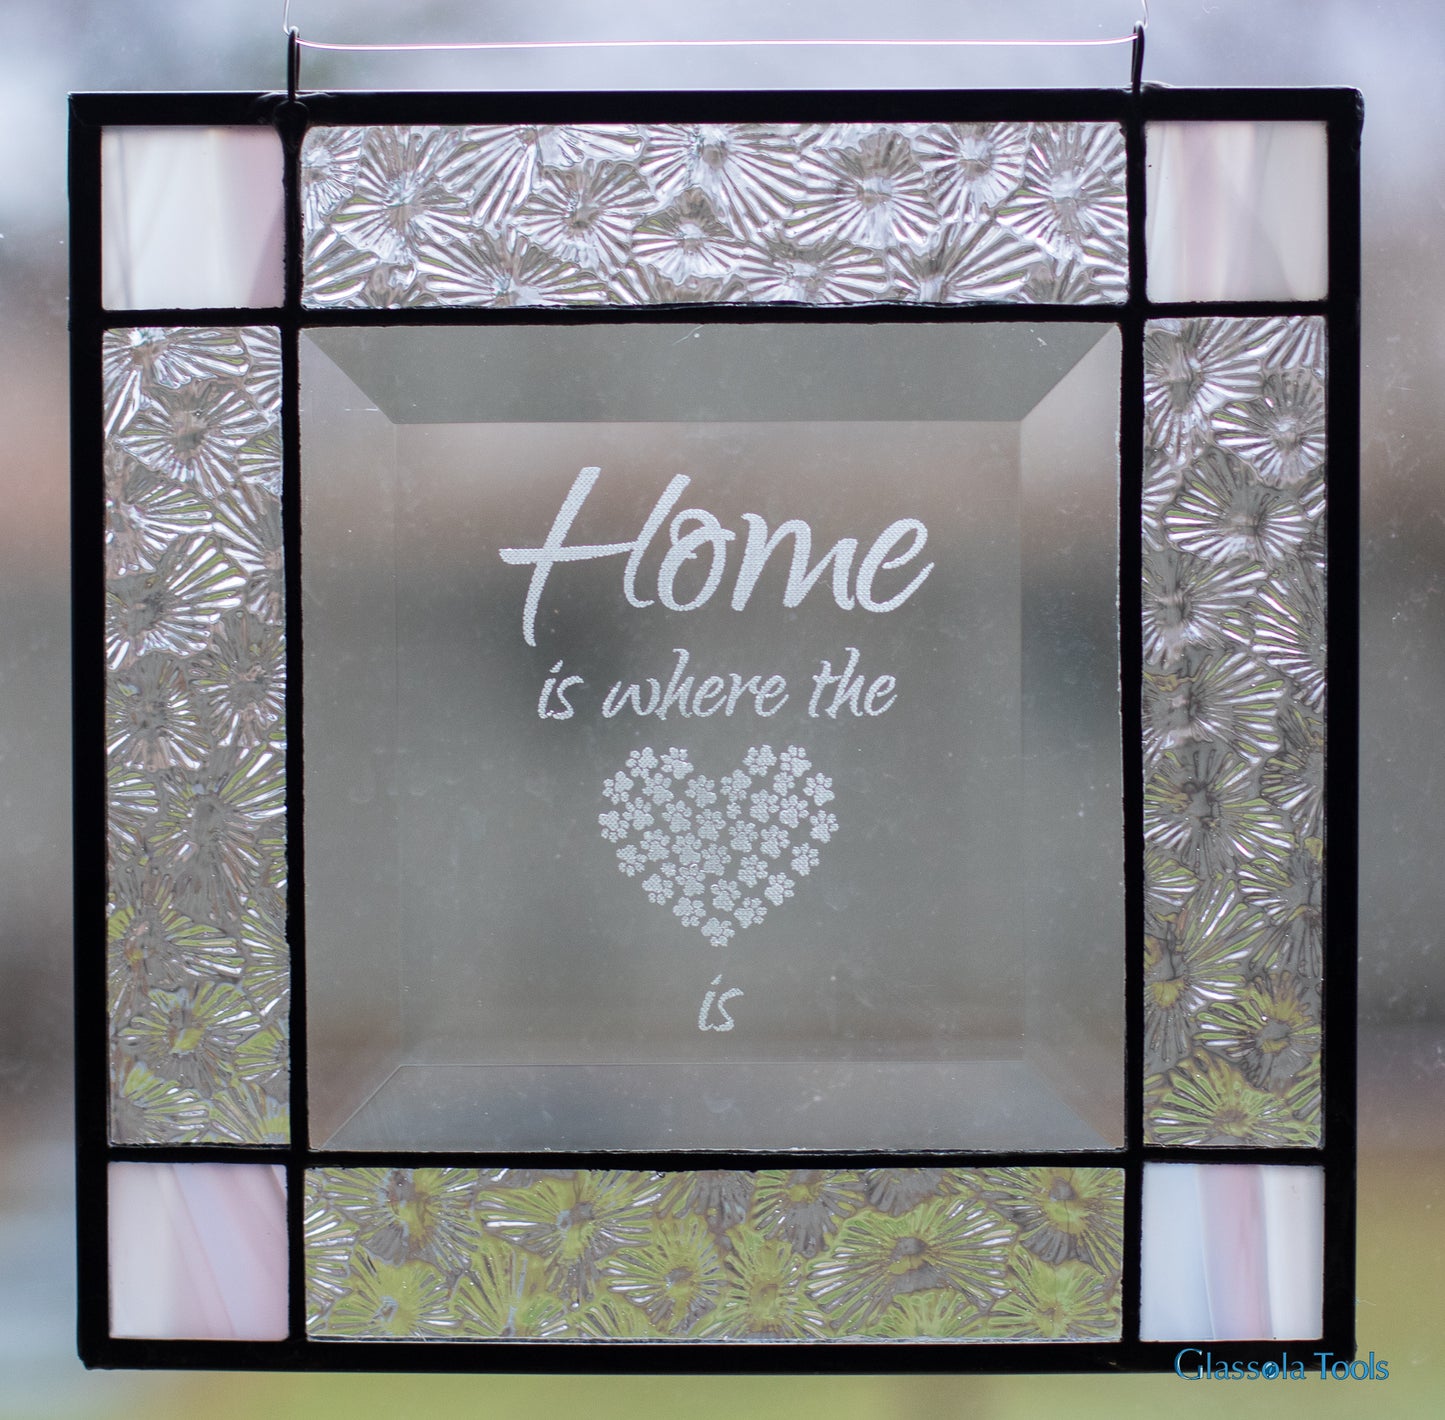 Engraved Bevel - Paw Heart, "Home is where the heart is"